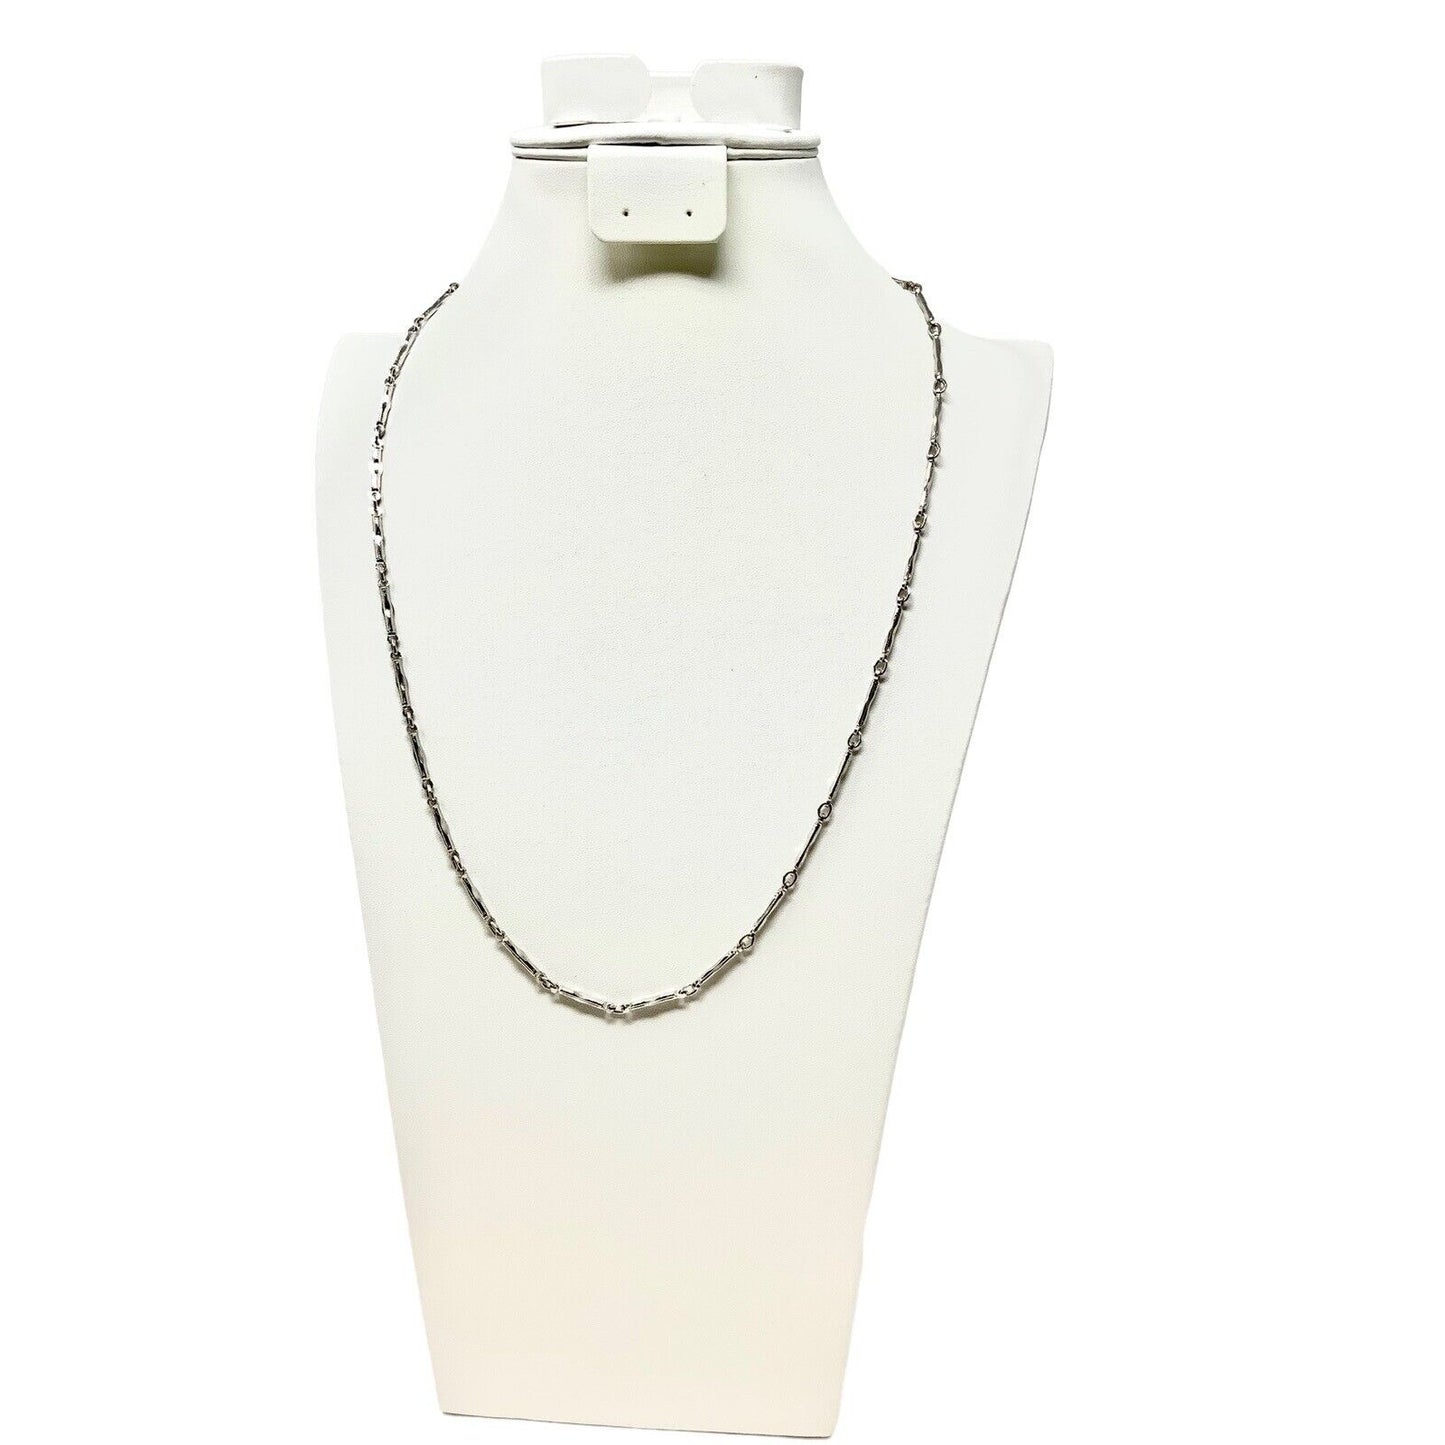 Silver Colored Bamboo Chain Link Necklace